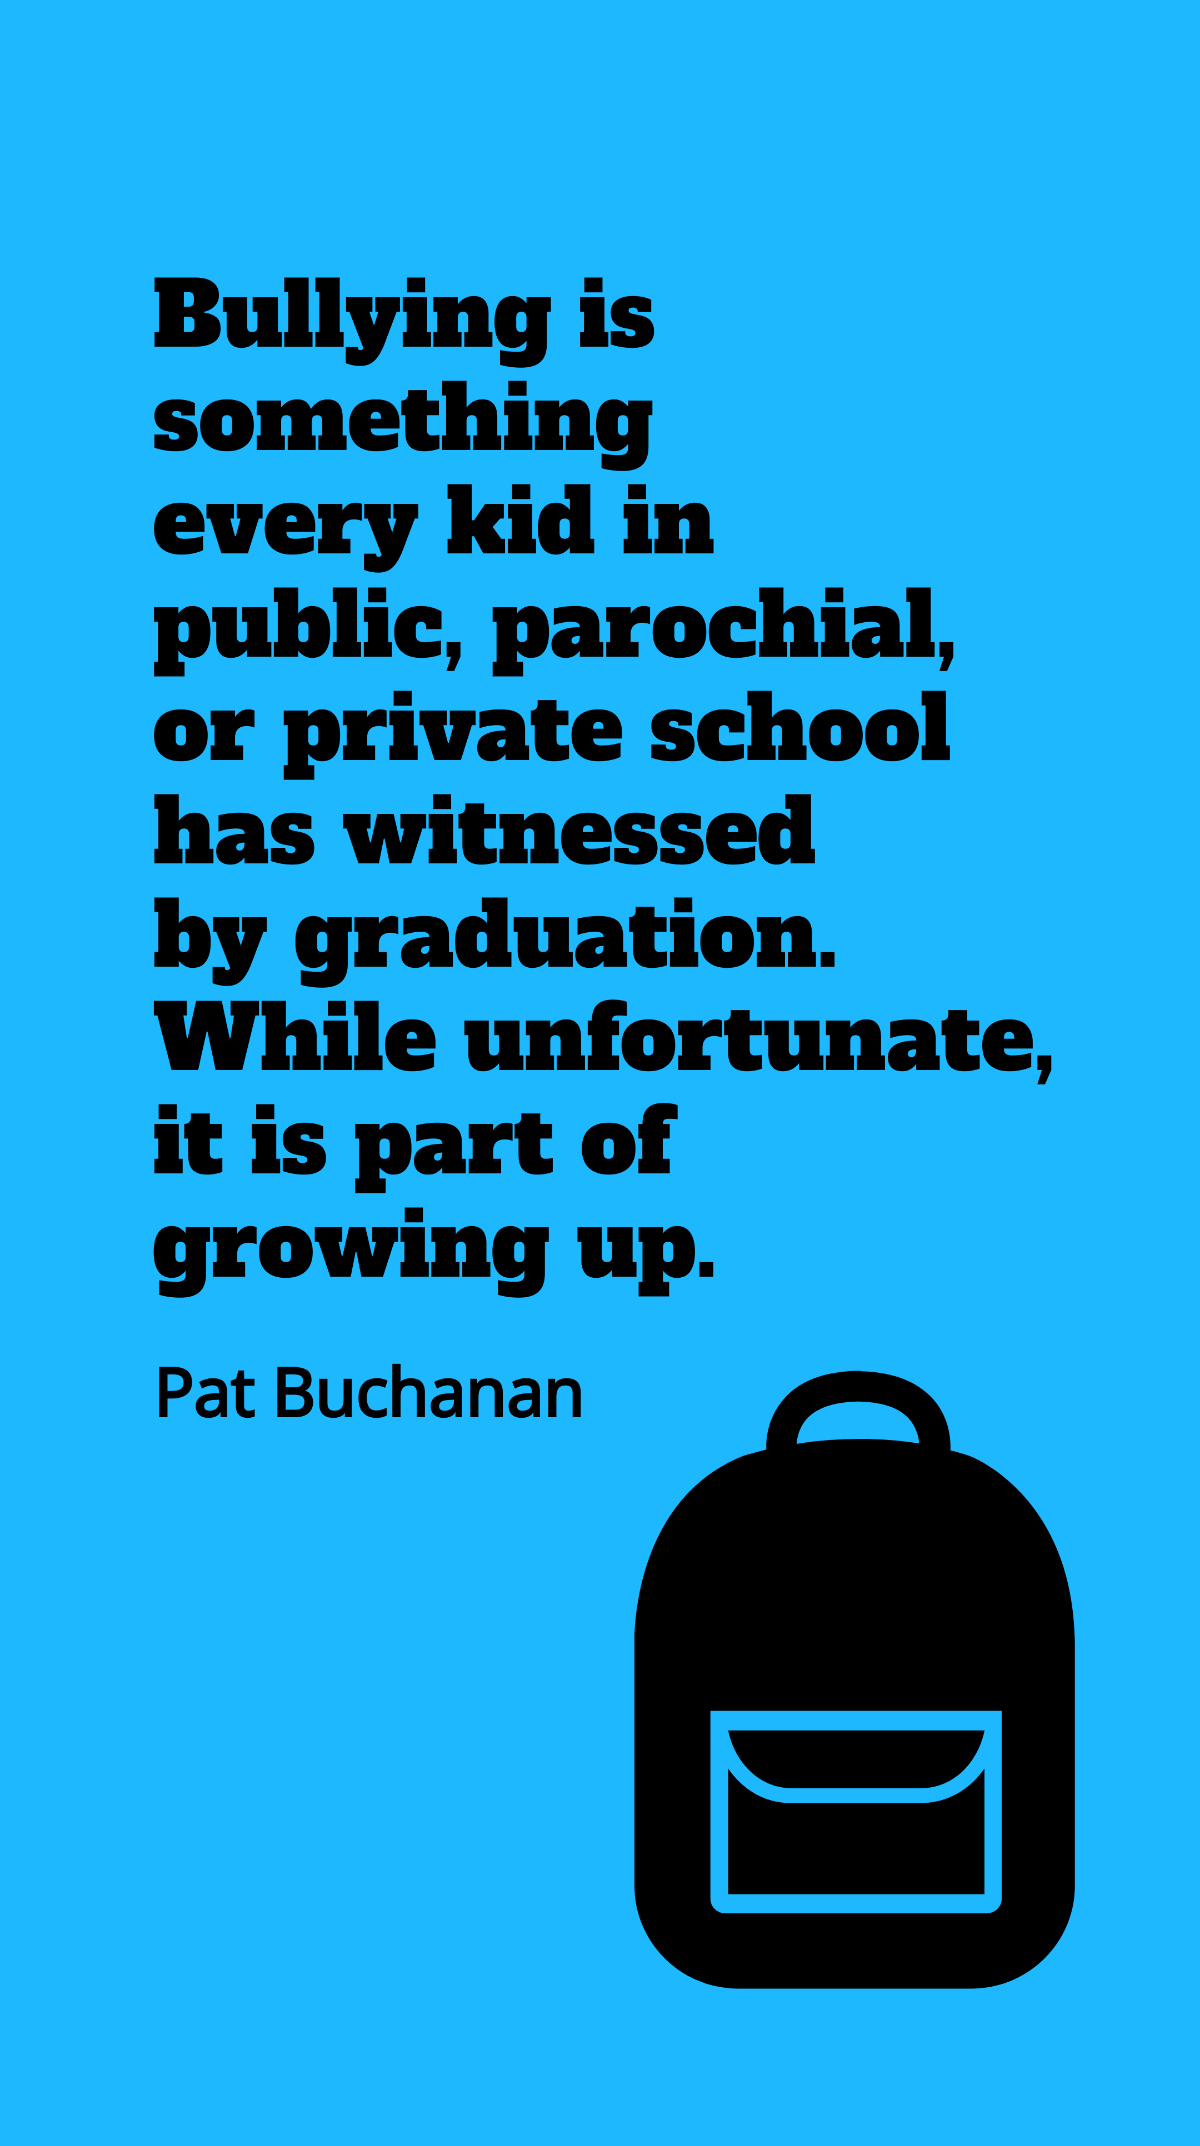 Free Pat Buchanan - Bullying is something every kid in public, parochial, or private school has witnessed by graduation. While unfortunate, it is part of growing up. Template